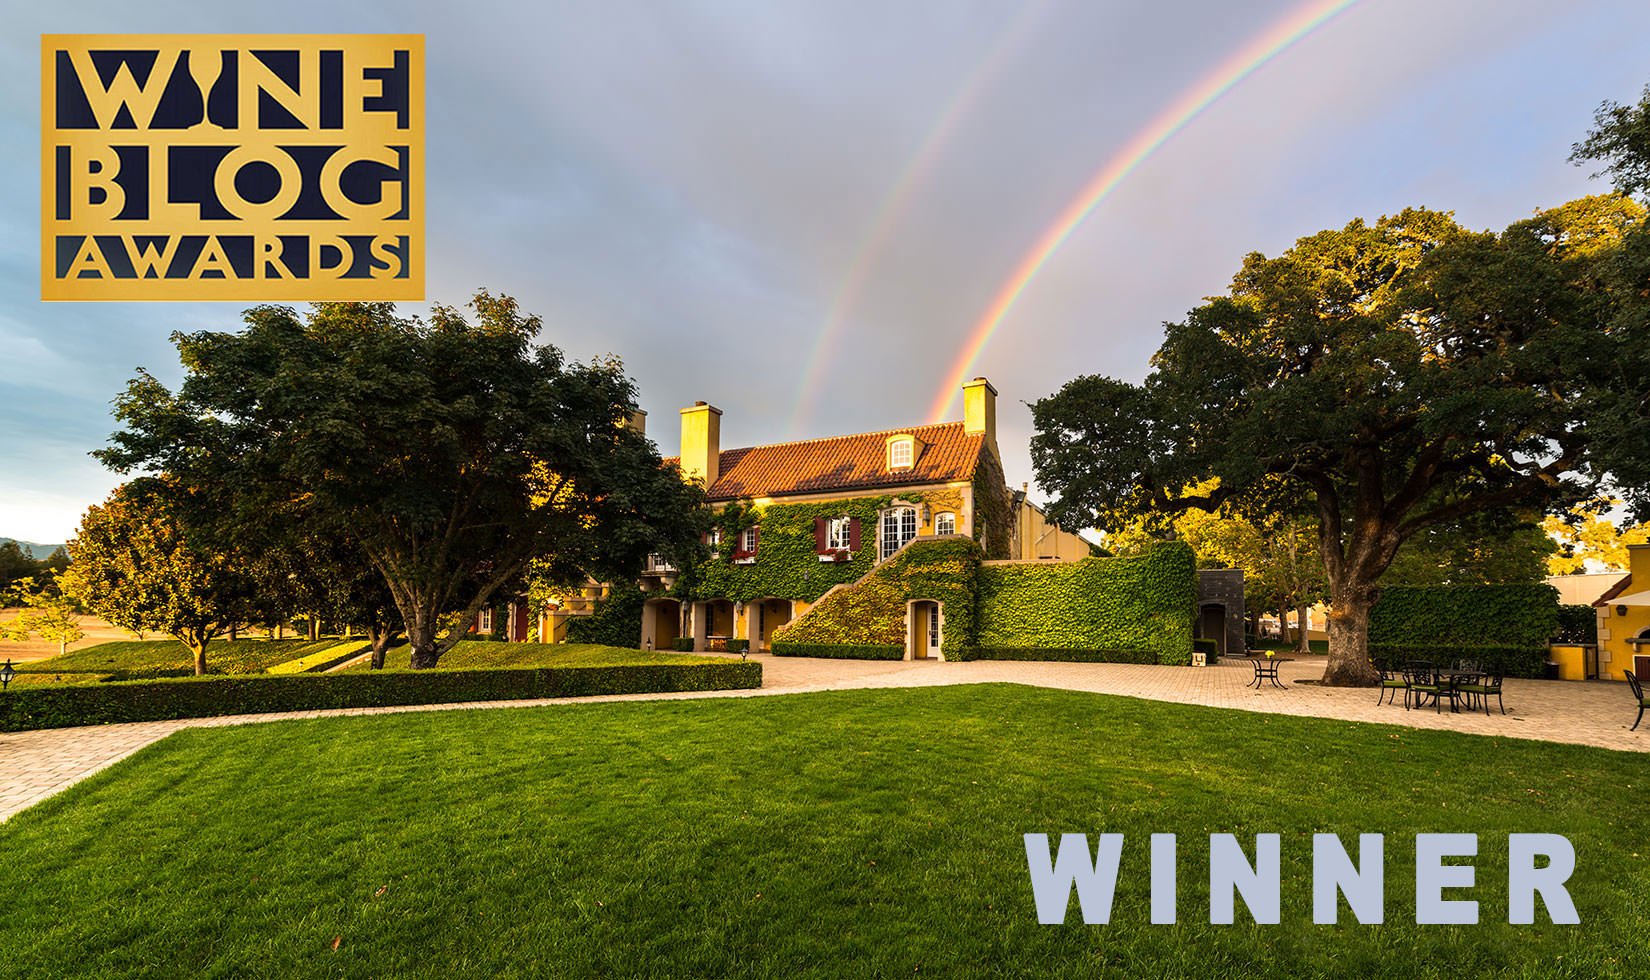 Jordan Winery Chateau with rainbow in background with Wine Blog Awards logo and image text: "Winner"